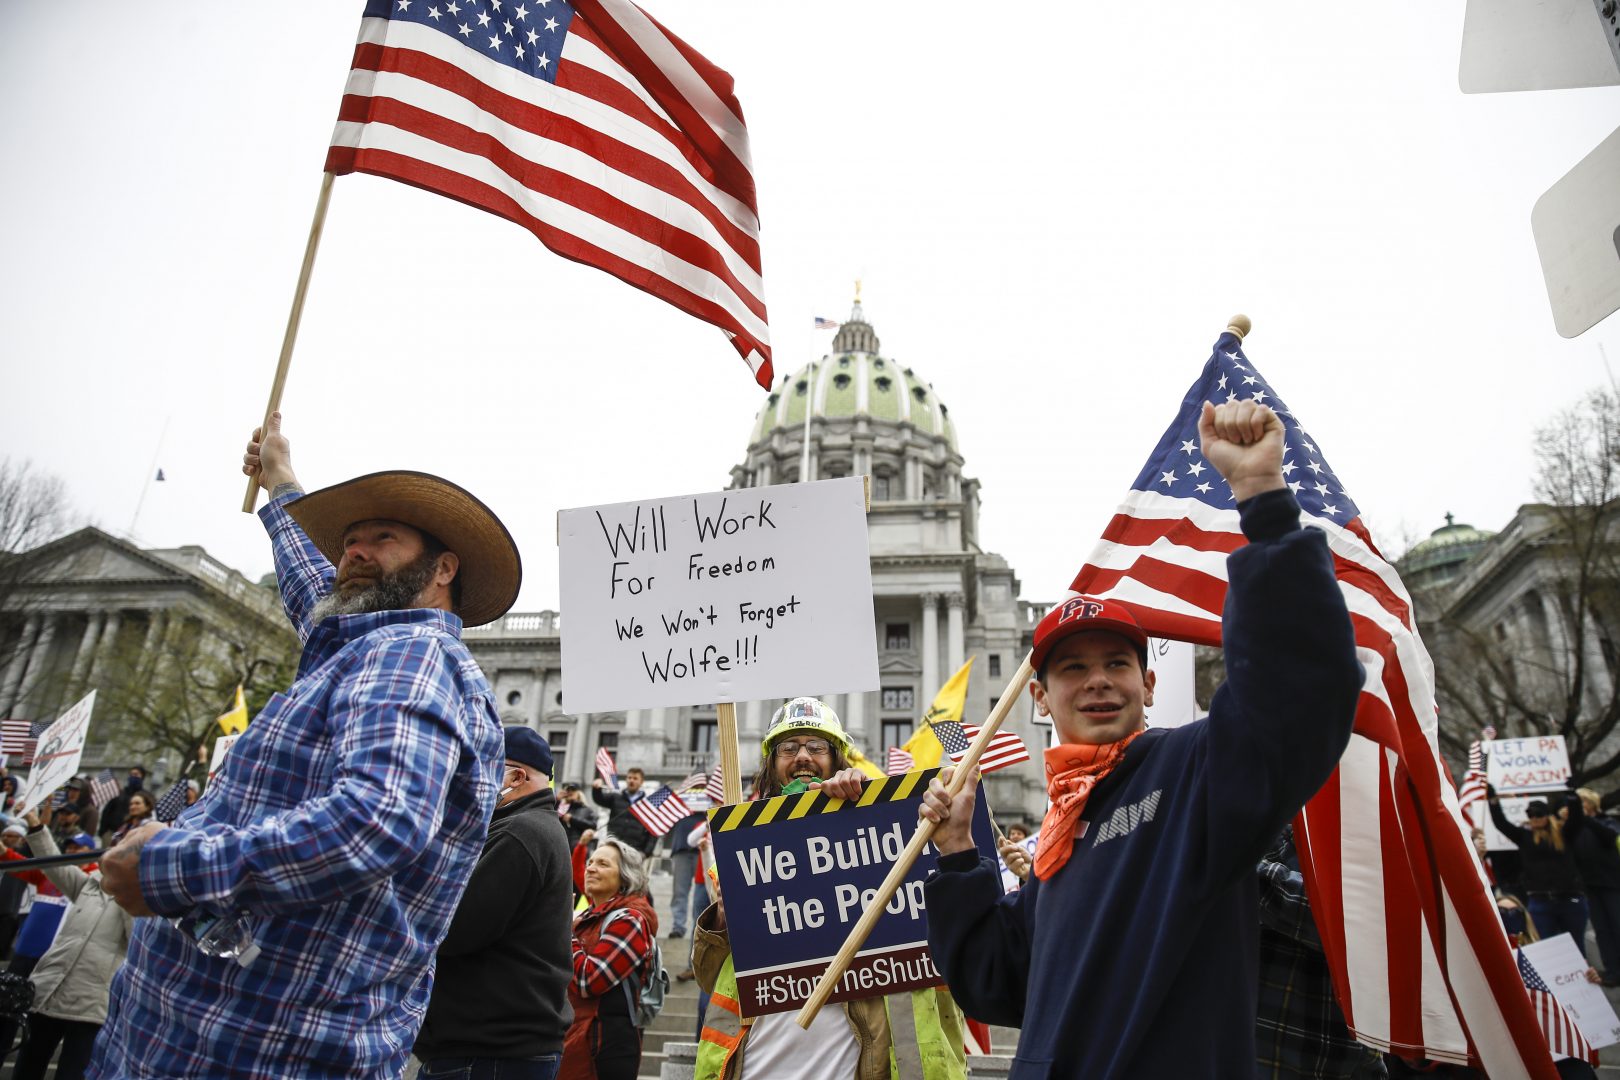 Protesters demonstrate at the state Capitol in Harrisburg, Pa., Monday, April 20, 2020, demanding that Gov. Tom Wolf reopen Pennsylvania's economy even as new social-distancing mandates took effect at stores and other commercial buildings.